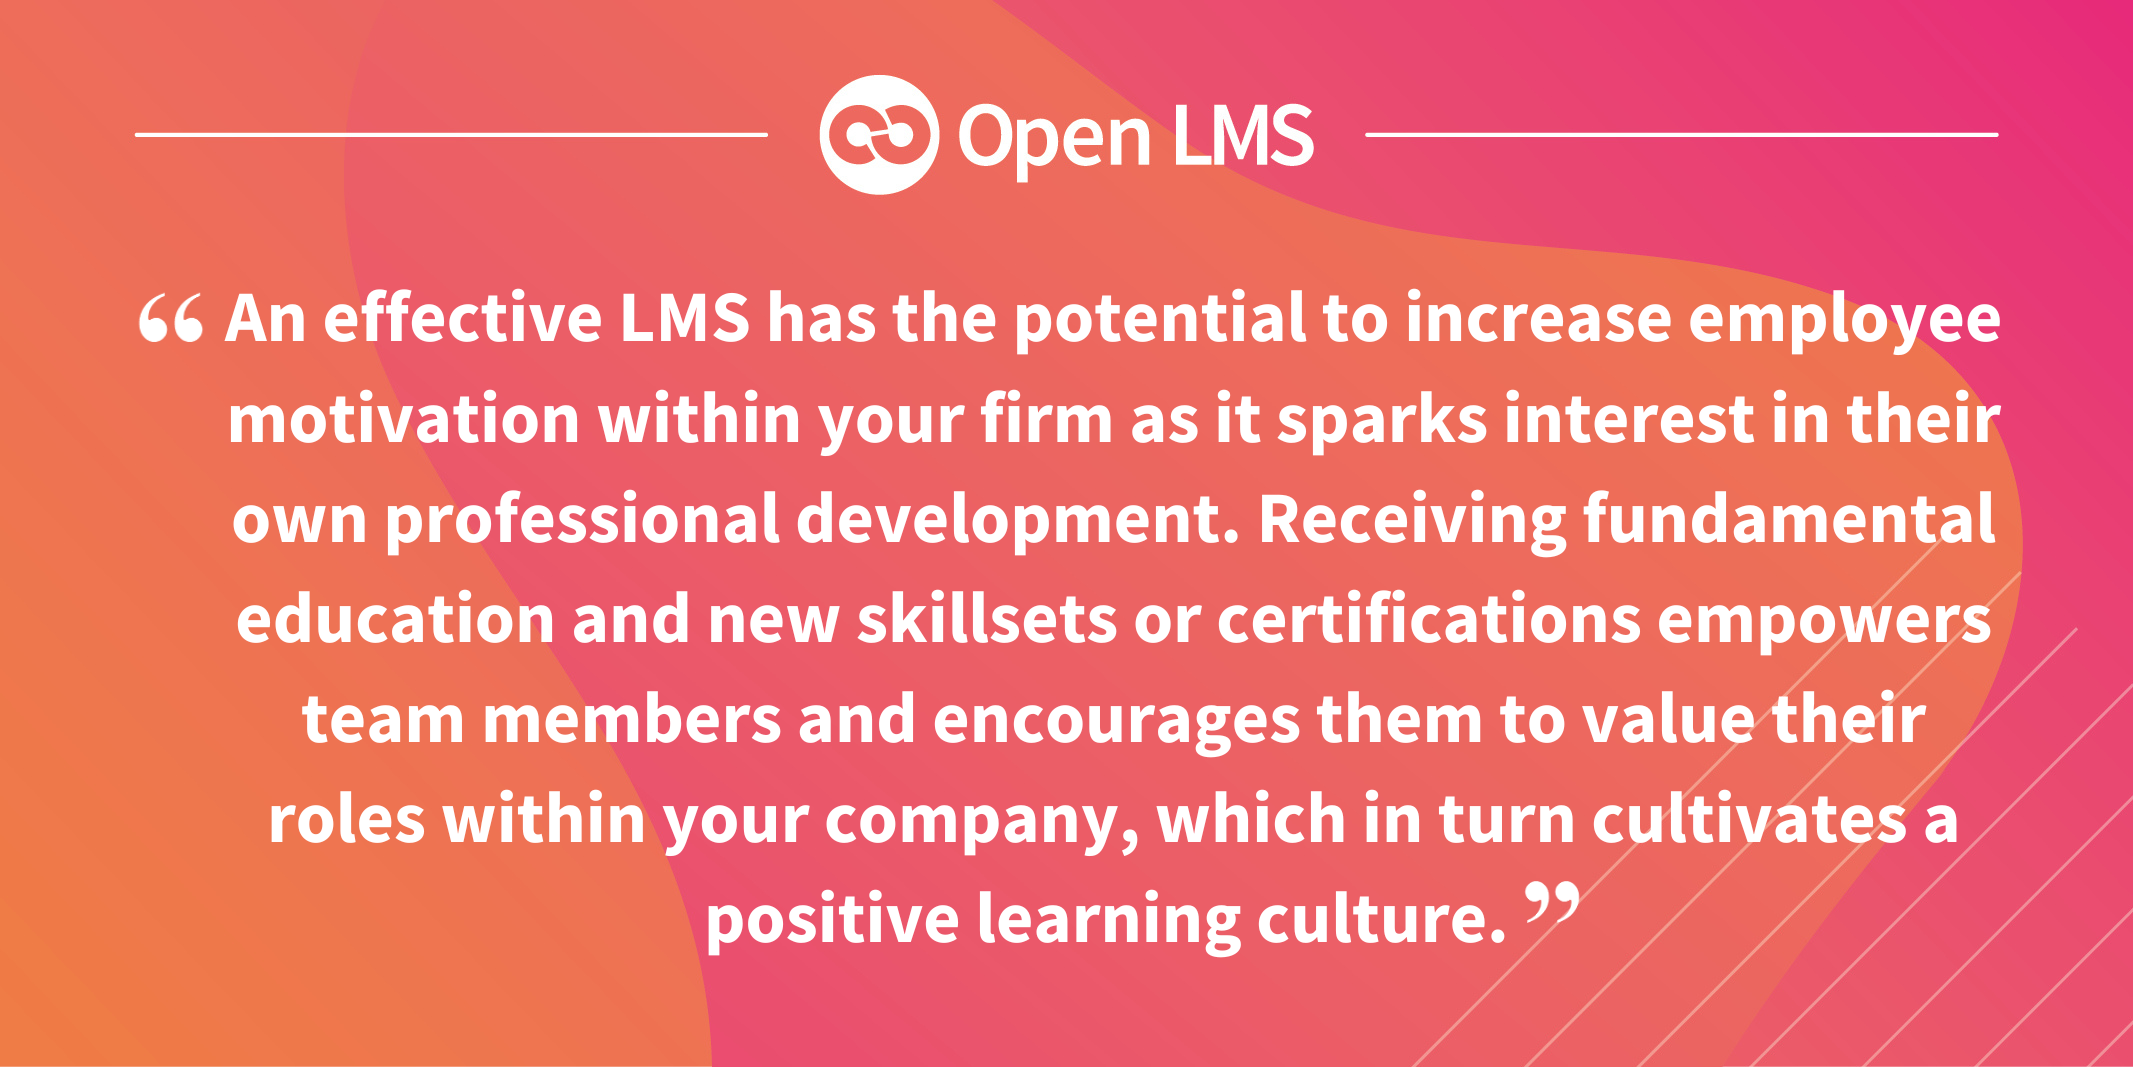 An effective LMS has the potential to increase employee motivation within your firm as it sparks interest in their own professional development. Receiving fundamental education and new skillsets or certifications empowers team members and encourages them to value their roles within your company, which in turn cultivates a positive learning culture. 